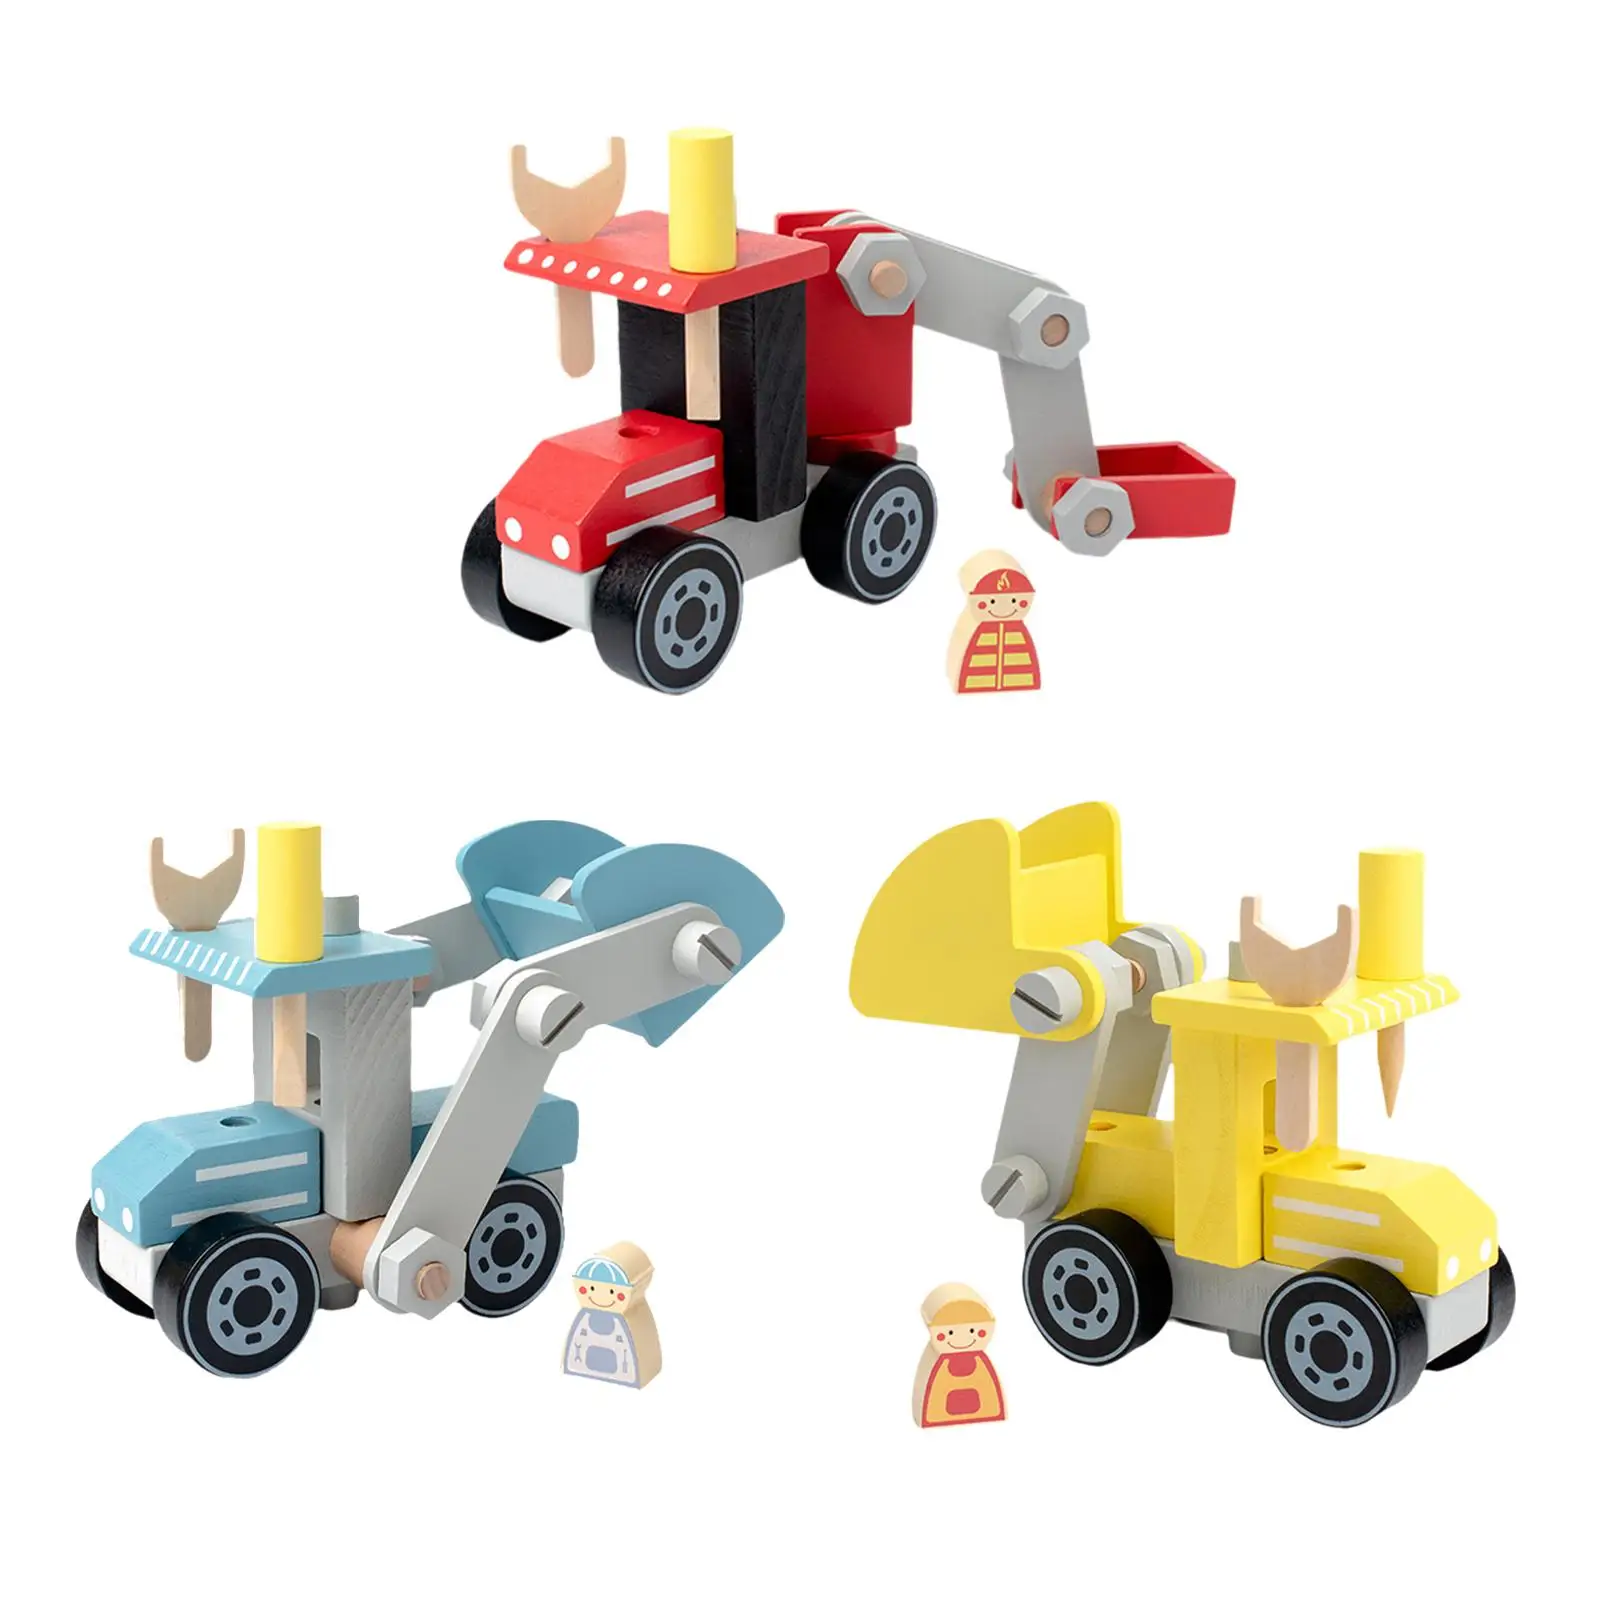 Detachable Engineering Building Blocks Toy Party Favors Wooden Construction Vehicles Toys for above 3 Years Old Boys Girls Child